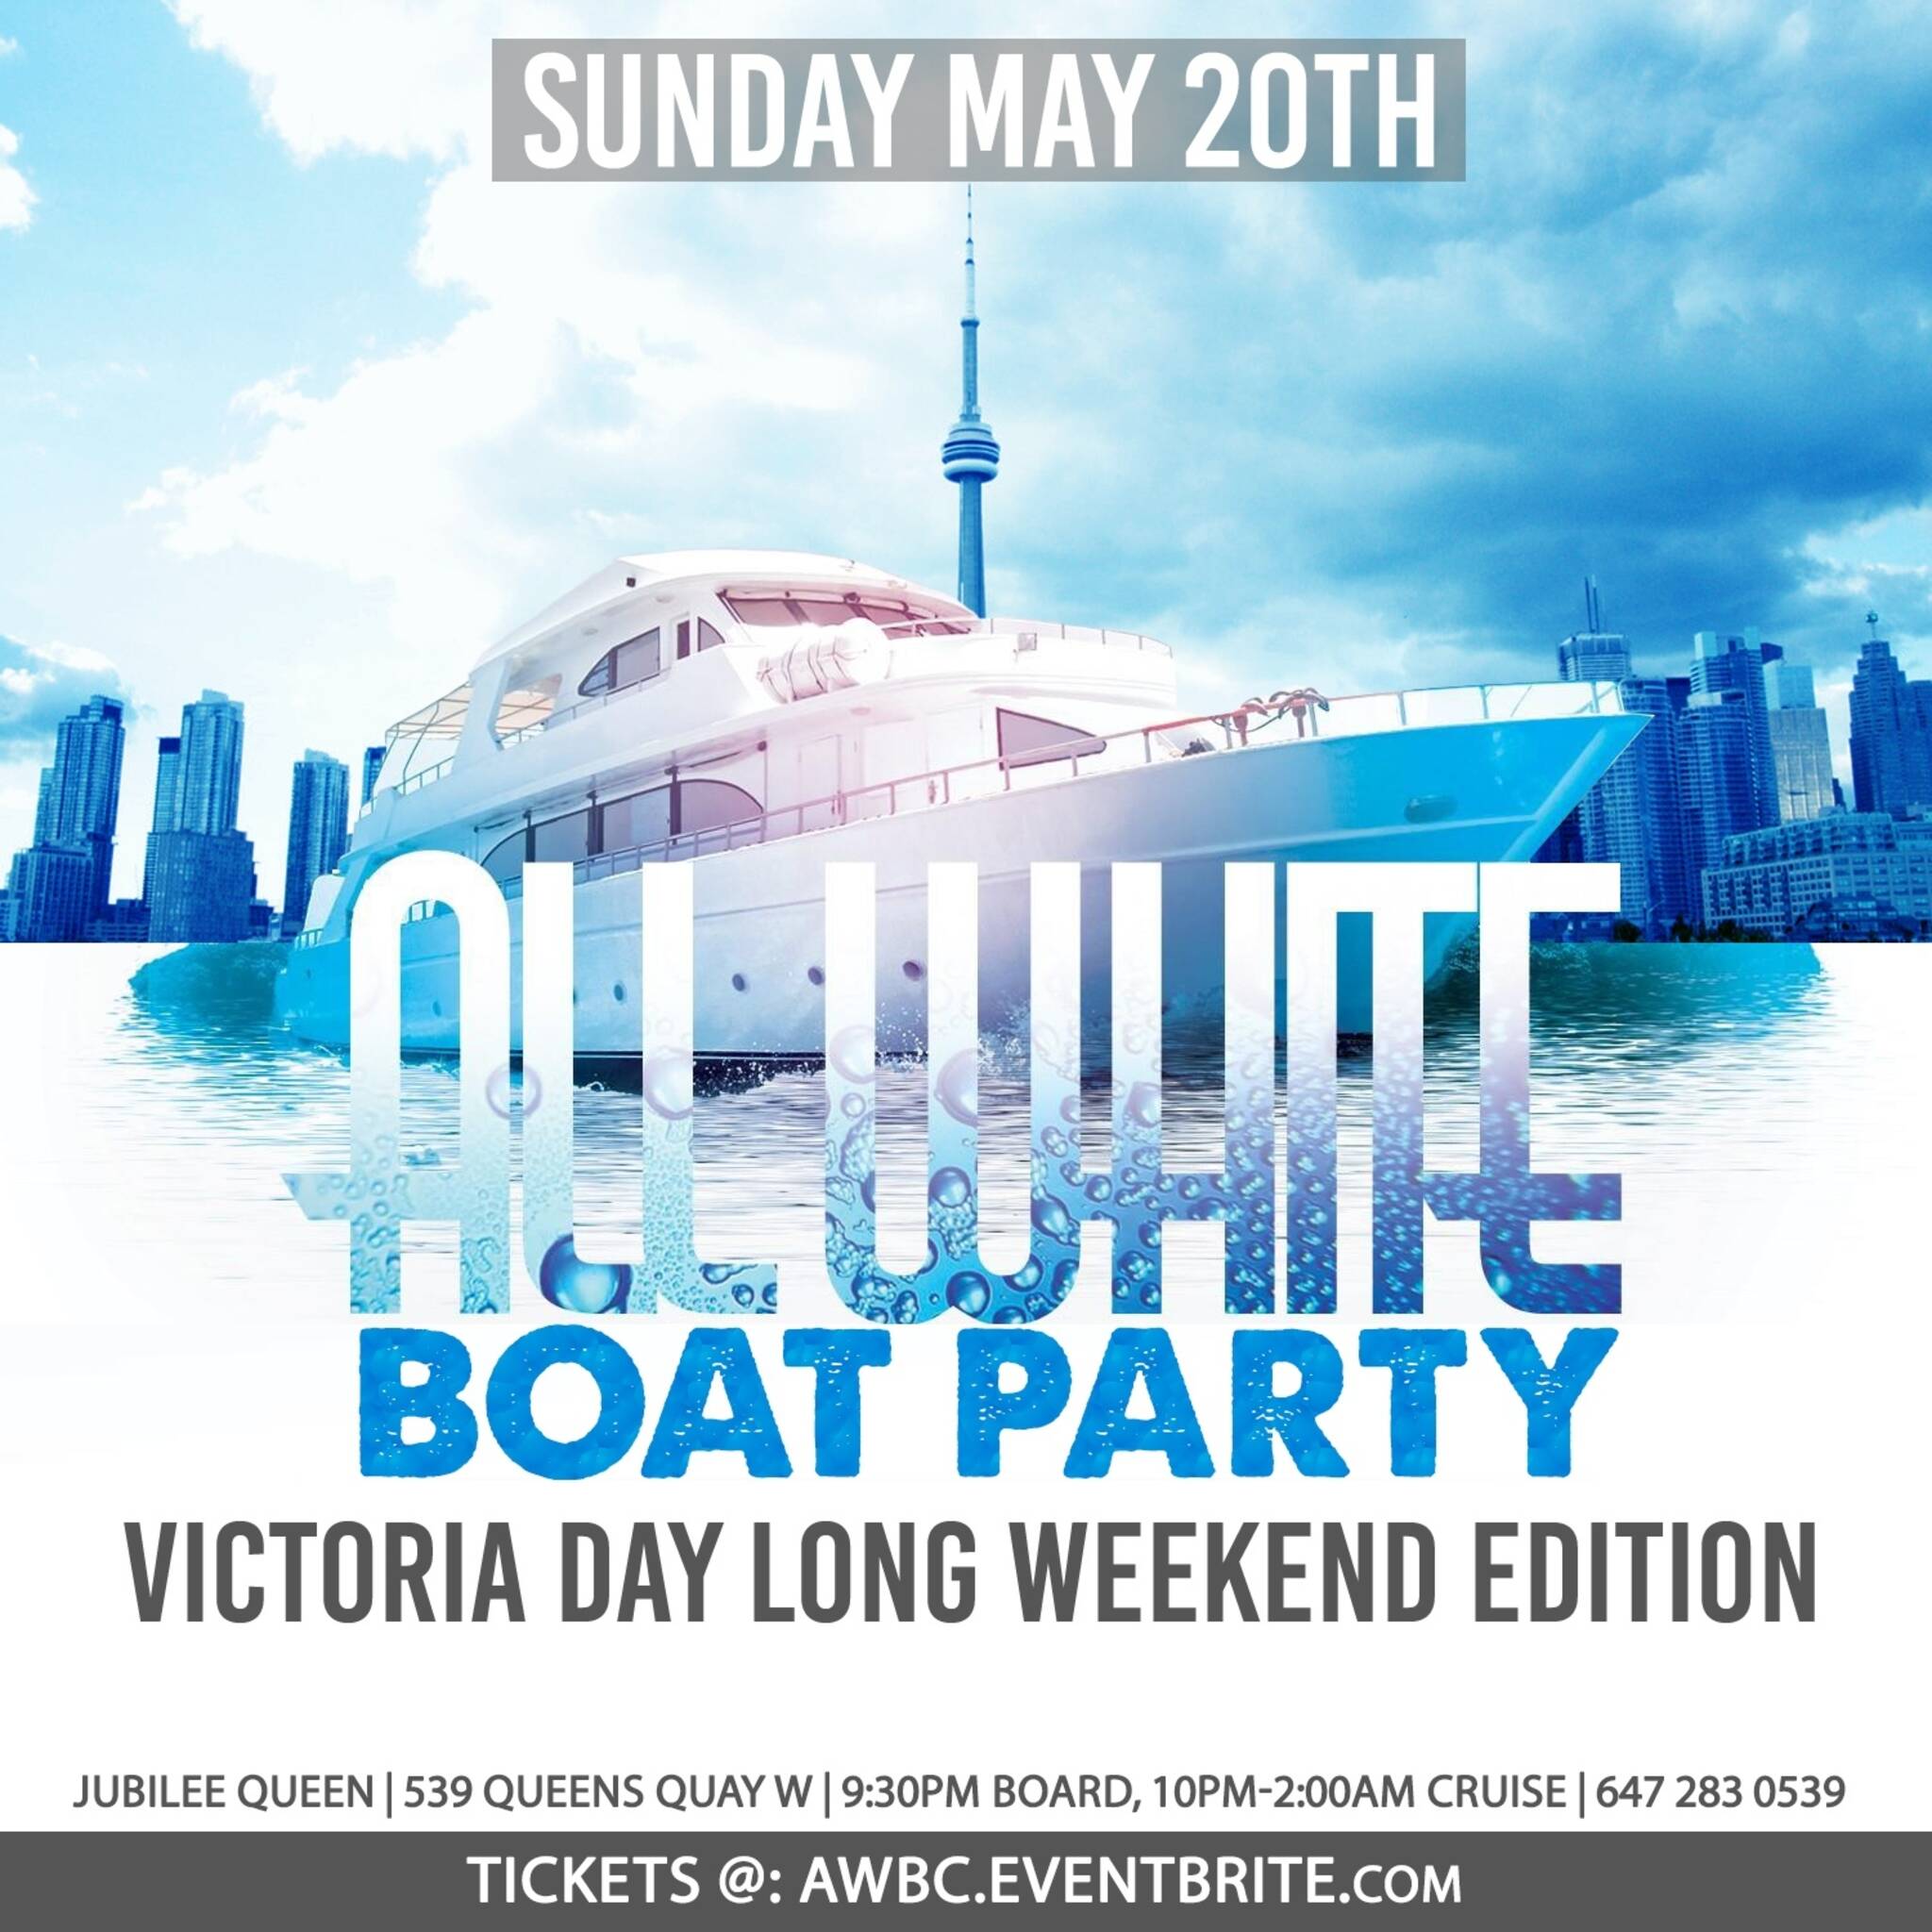 Celebrate Memorial Day Weekend With an All-White Boat Party